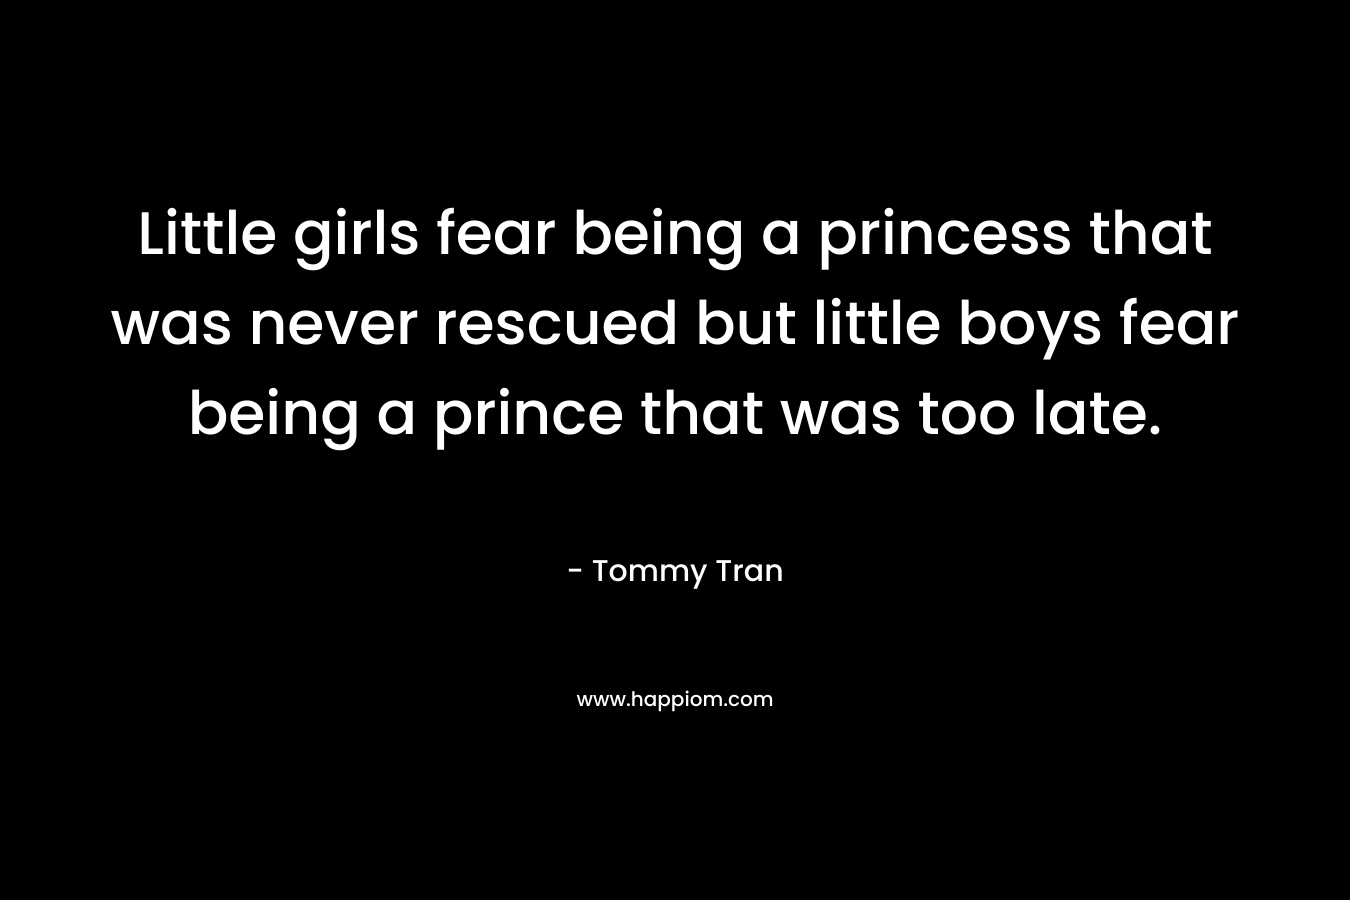 Little girls fear being a princess that was never rescued but little boys fear being a prince that was too late. – Tommy Tran